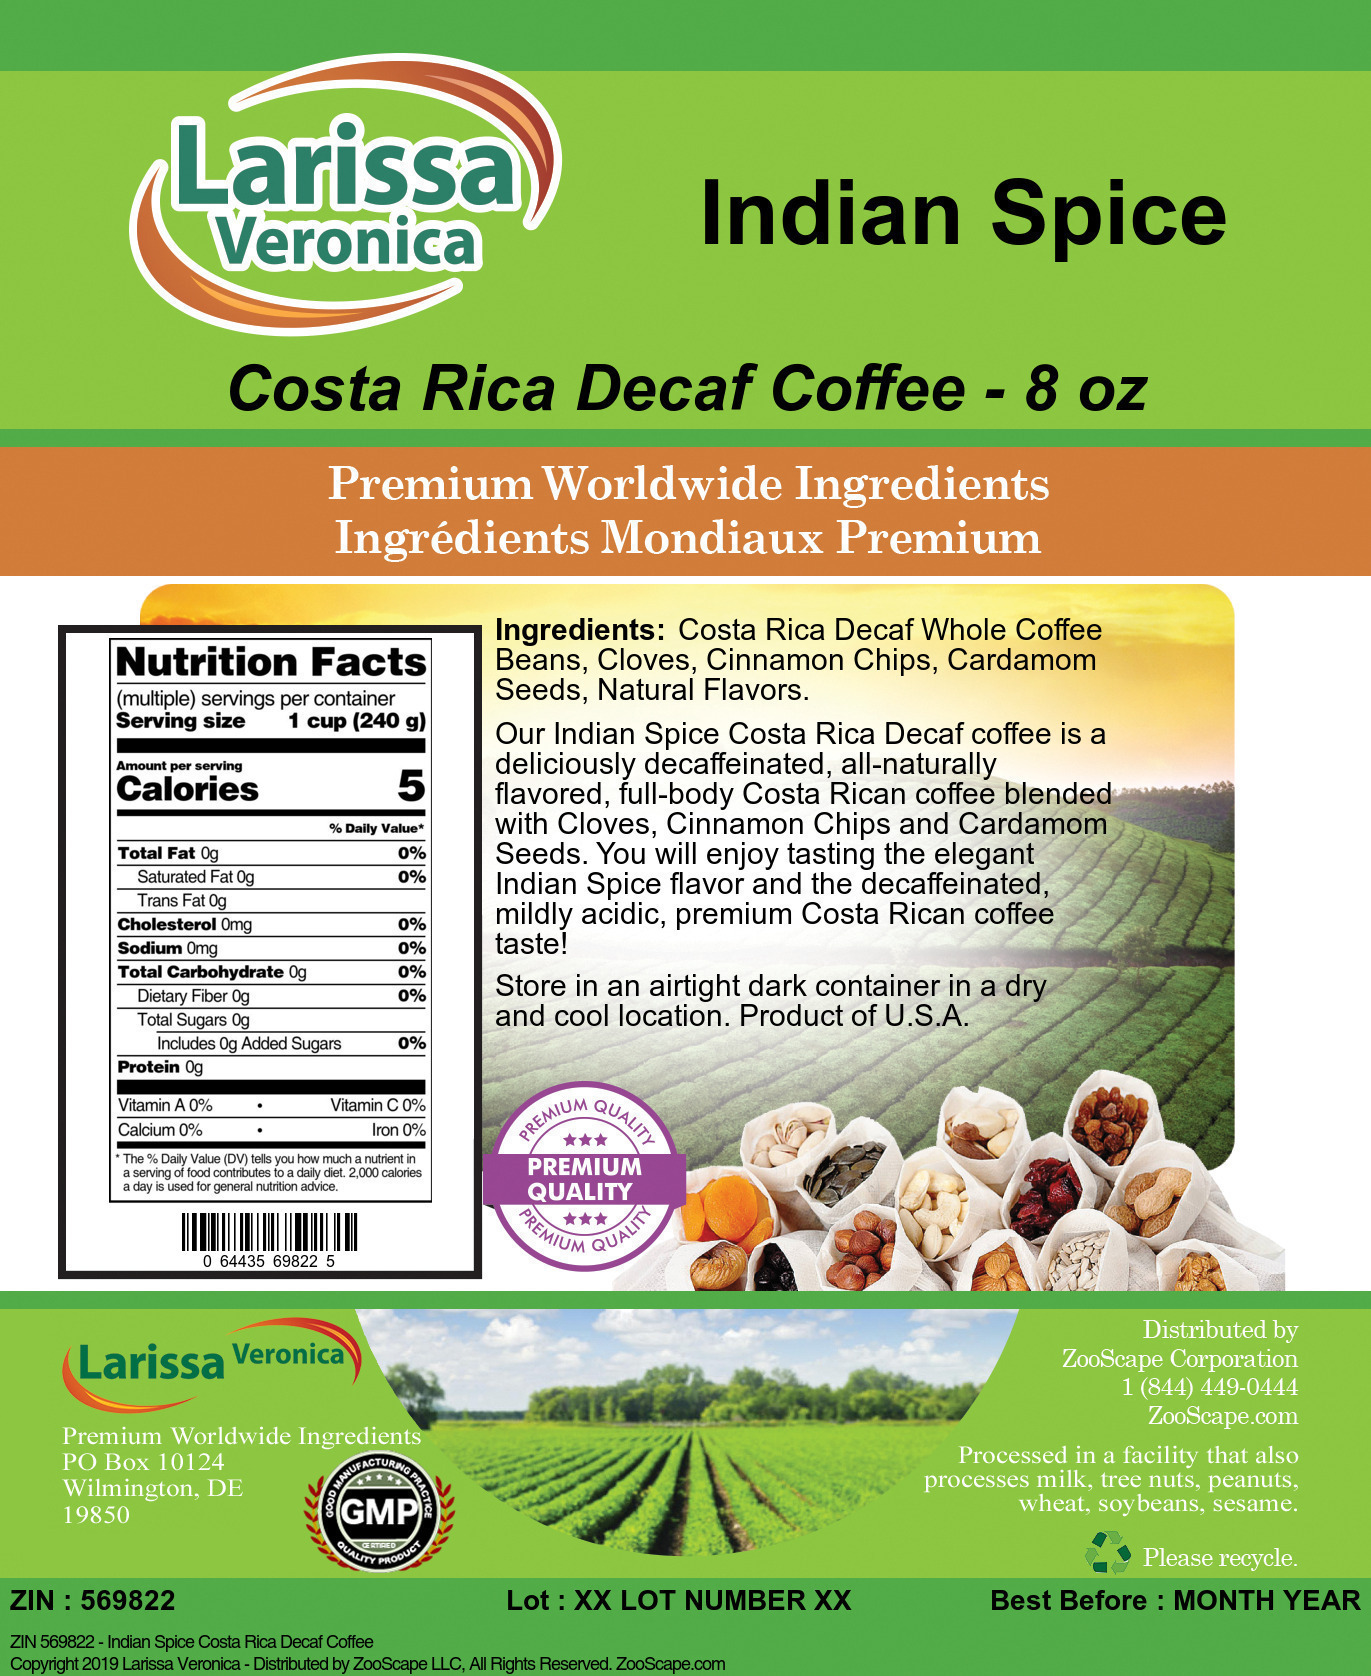 Indian Spice Costa Rica Decaf Coffee - Label